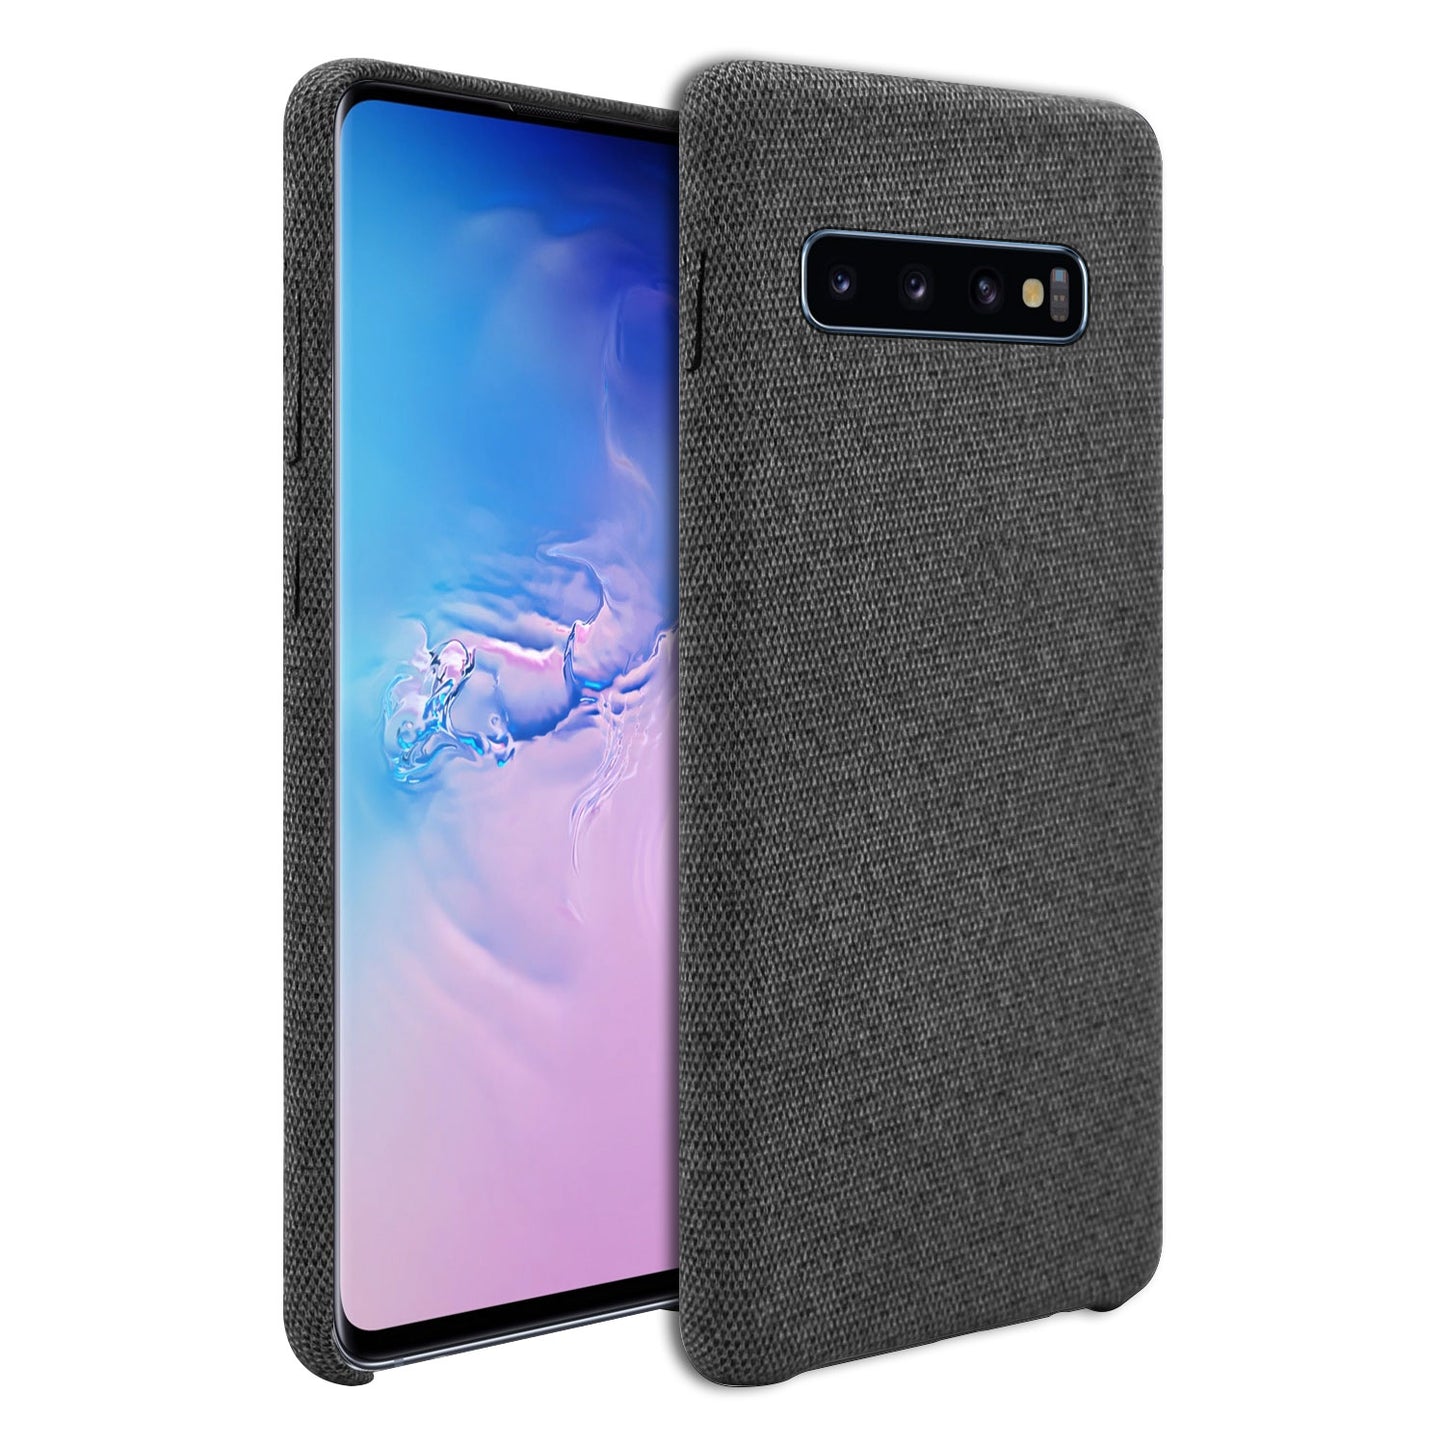 Samsung Galaxy S10 Case, Durable Slim Fabric Case for Samsung Galaxy S10 - by Cellet - Black